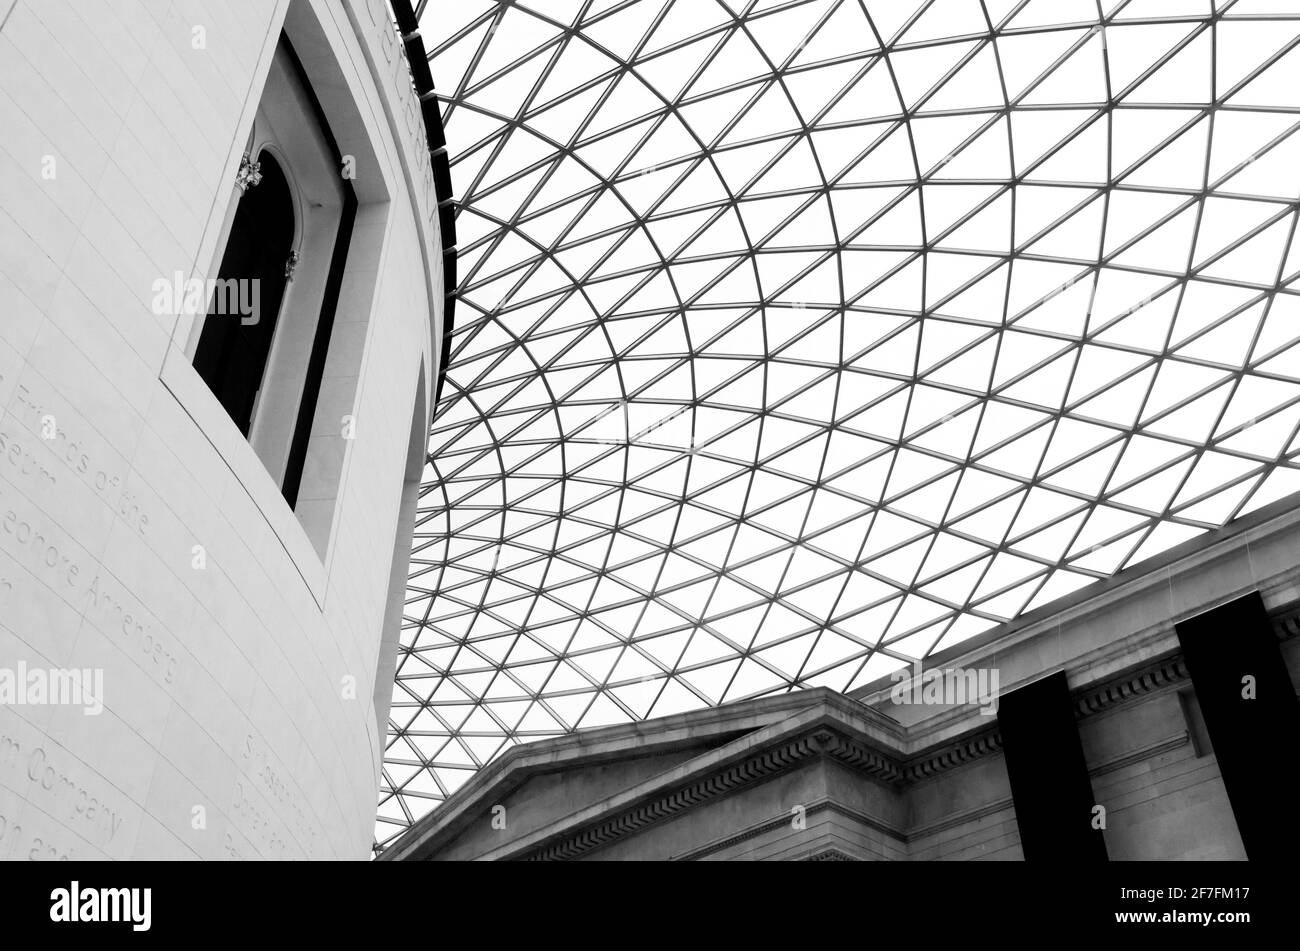 A window of the Reading Room, and tessellated, gridshell glass roof of the Queen Elizabeth II Great Court of the British Museum, London, UK. B&W Stock Photo